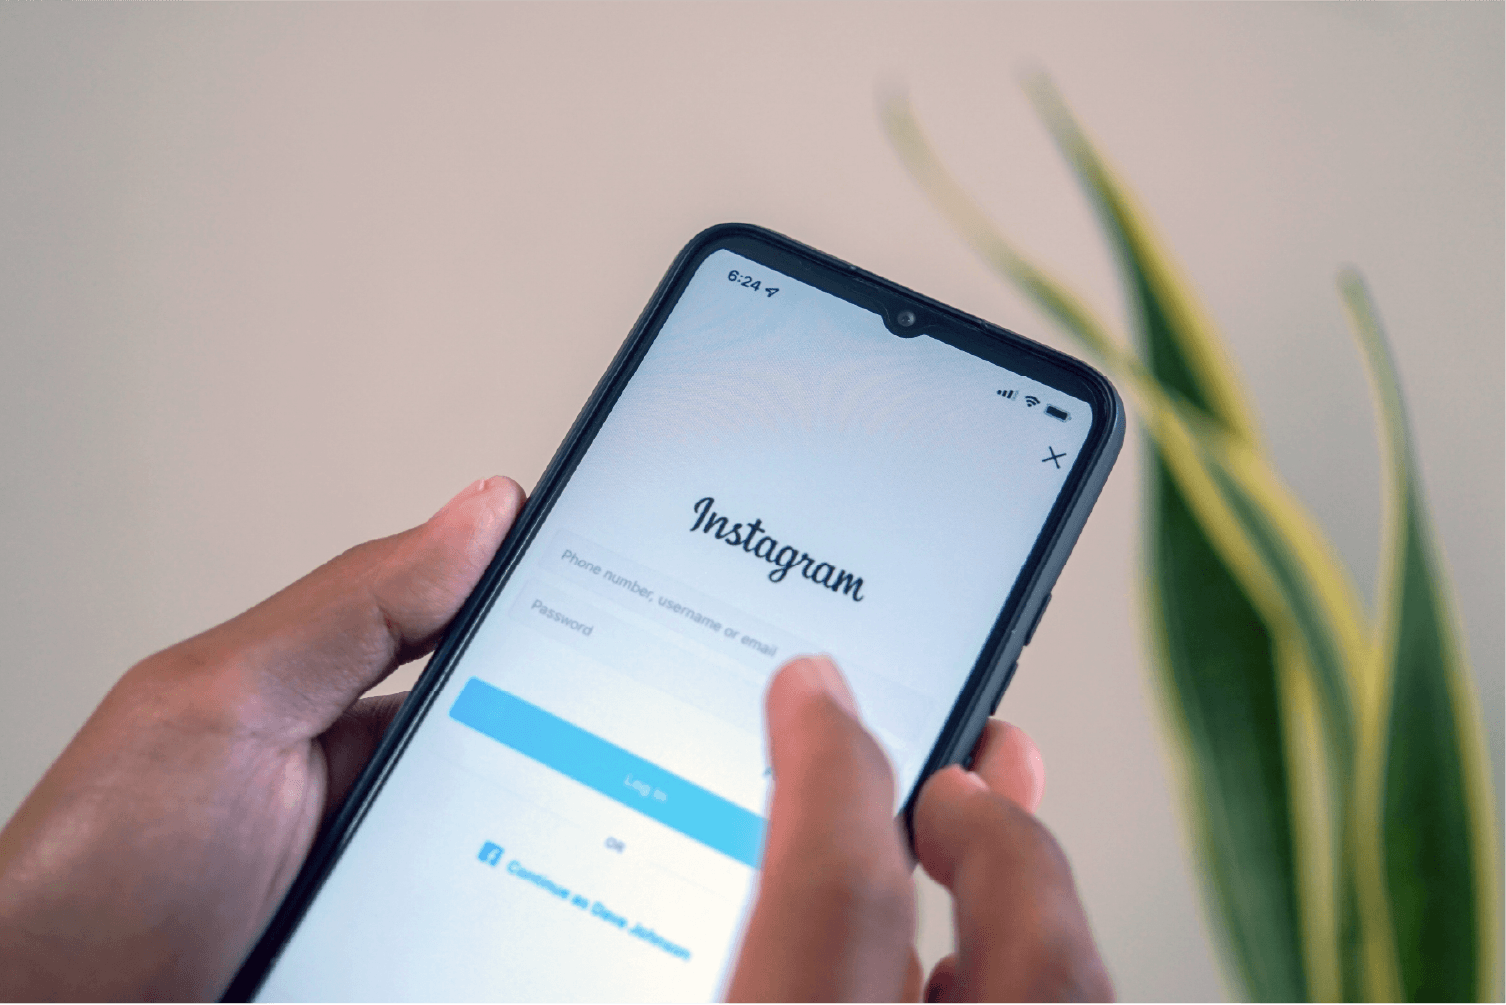 social media: holding phone with instagram login